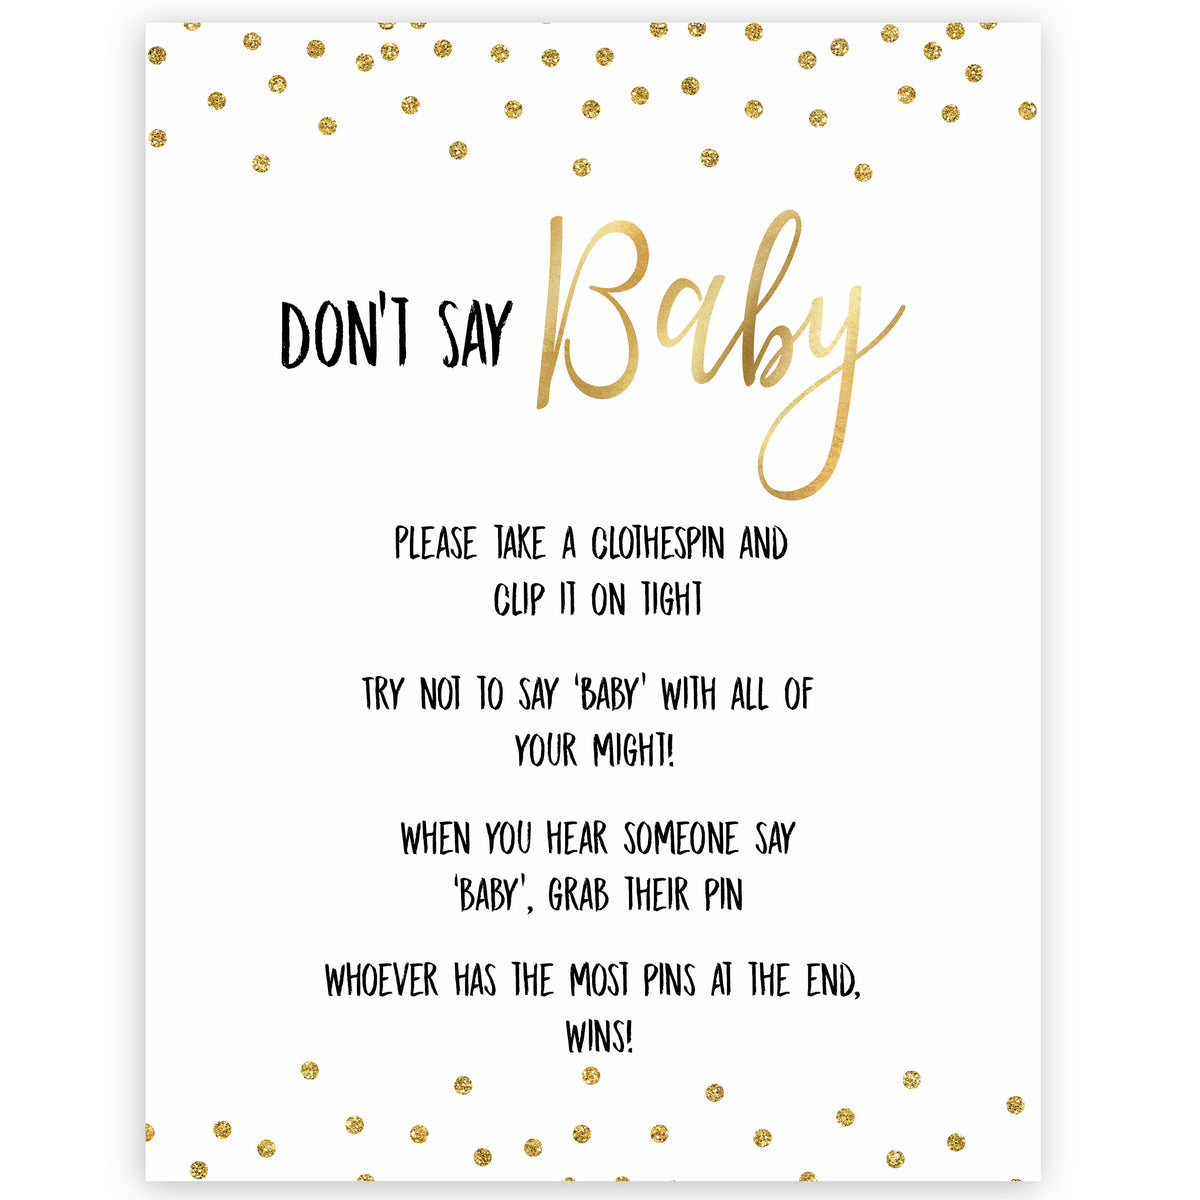 printable-don-t-say-baby-8x10-clothes-pin-or-pacifier-necklace-baby